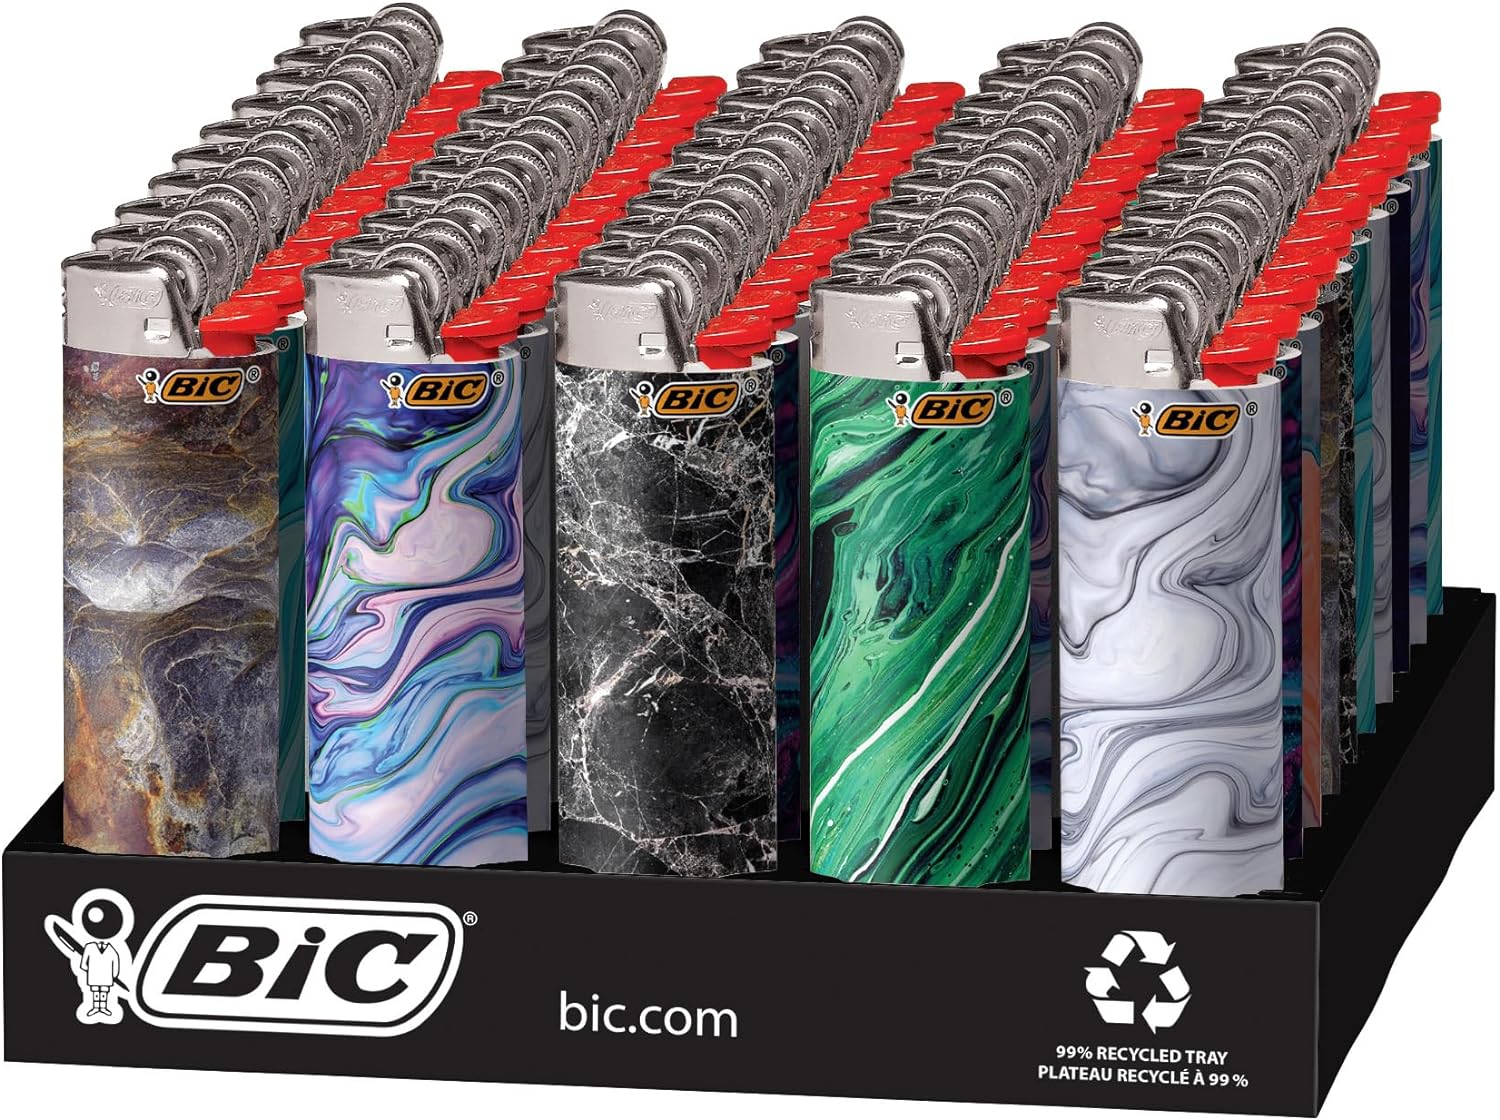 The last time I bought a package of 50 Bic Lighters was over 3 years ago. Bic Lighters are the only ones I will buy since they last a long time, and light consistently. When I saw this set of patterned lighters for only a couple dollars more than the plain colors, I decided to buy them. Why not have pretty lightersThey come in a holder that keeps all of the lighters tidy and organized. The patterns and colors are all so very pretty, and there are so many I couldn't even begin to show all the p